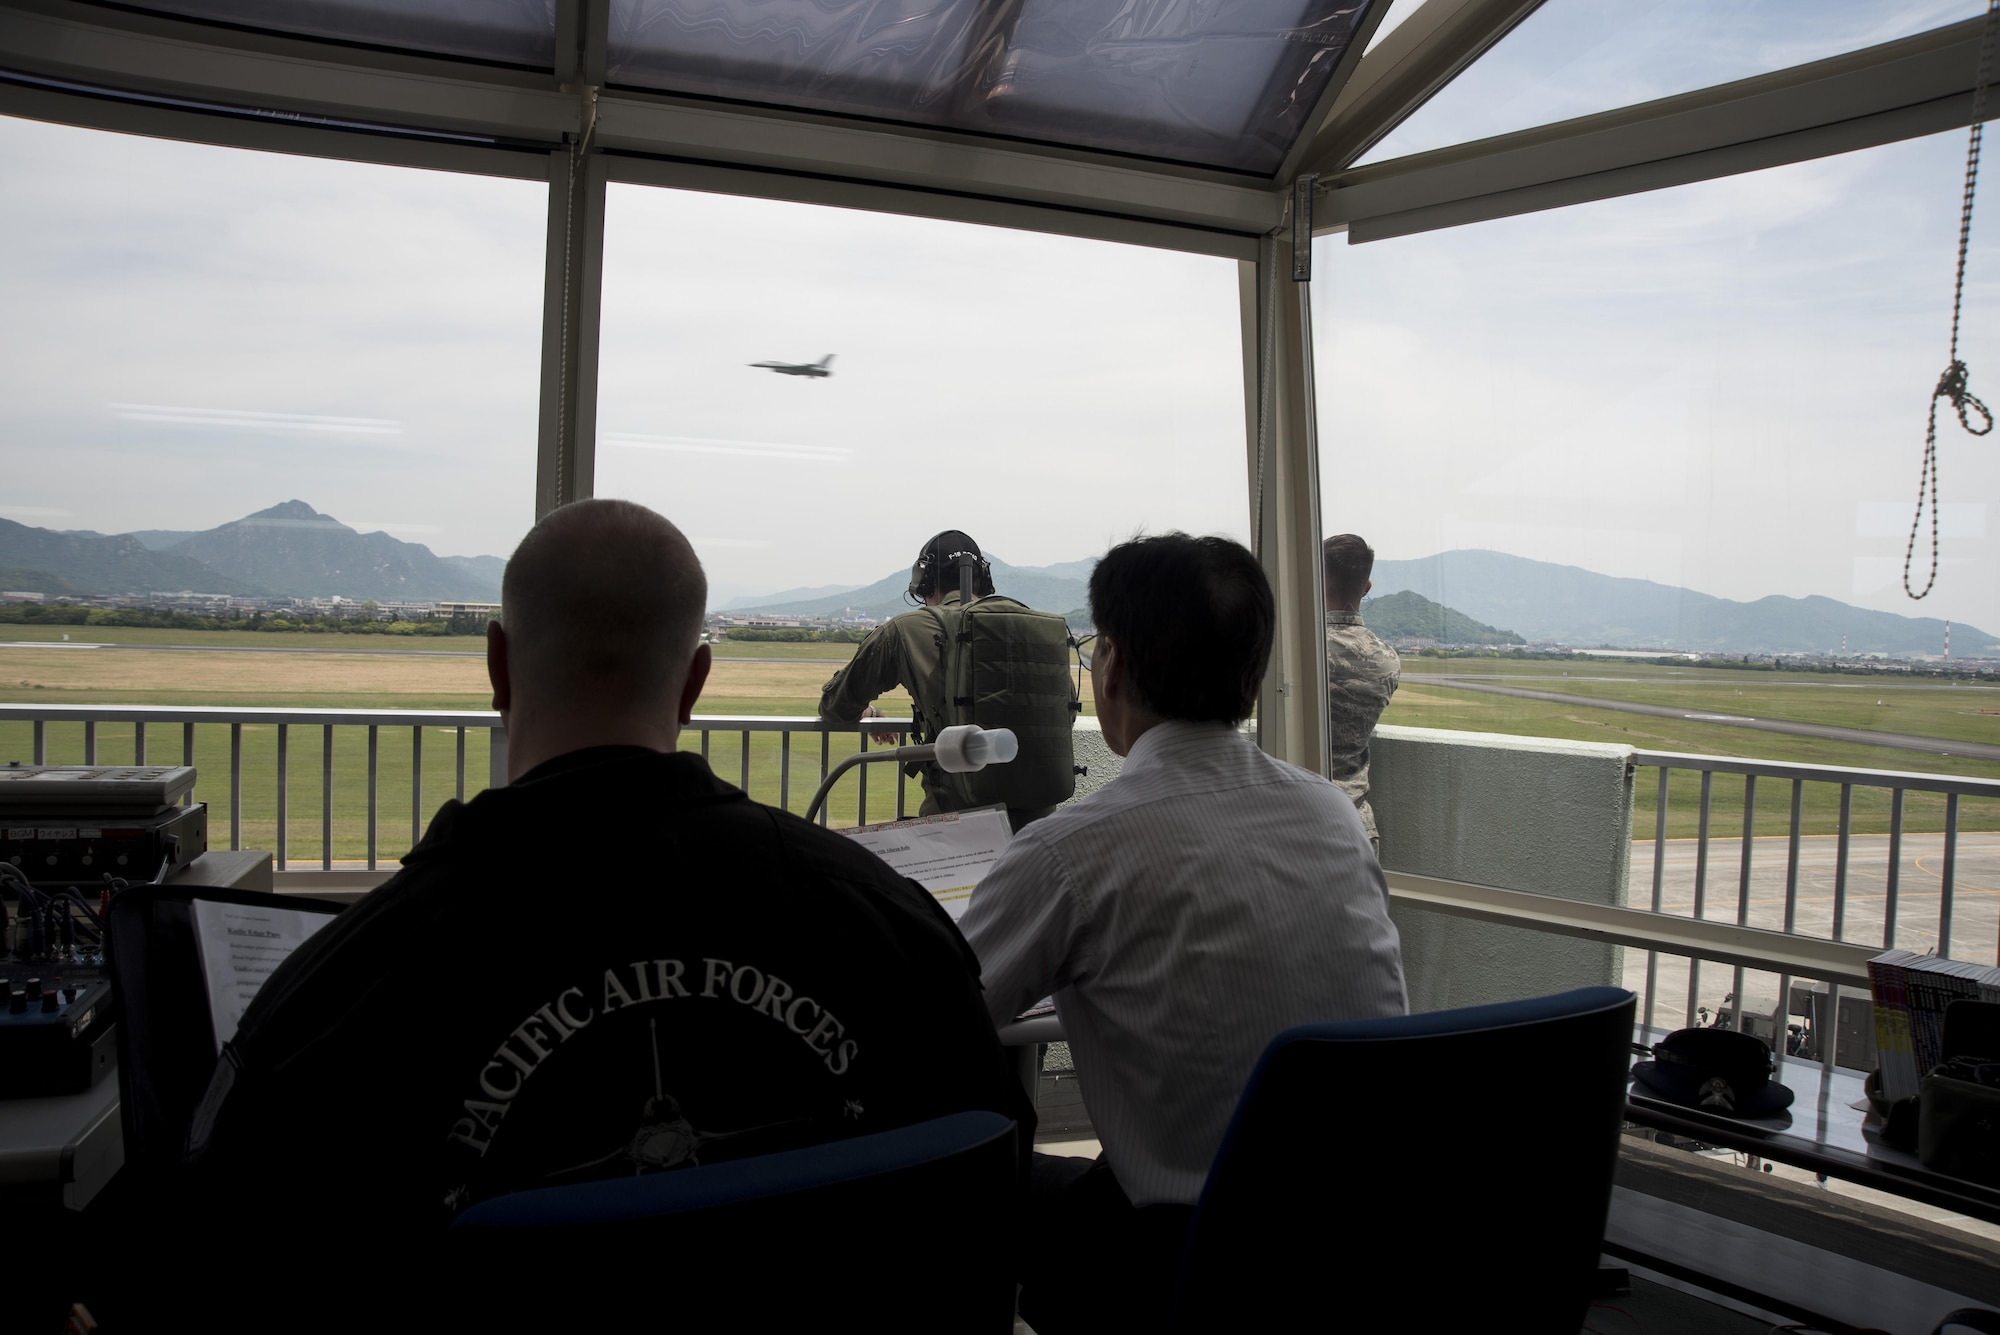 Members of the Pacific Air Forces F-16 Demonstration Team watch as an F-16 Fighting Falcon flies by during the Hofu Air Festival at Hofu-kita Air Base, Japan, May 21, 2017. The team's purpose is to strengthen the U.S. relationship with countries in the Pacific region through demonstrations showing the pinnacle of the Air Force core values of integrity, service and excellence. (U.S. Air Force photo by Staff Sgt. Melanie Hutto)